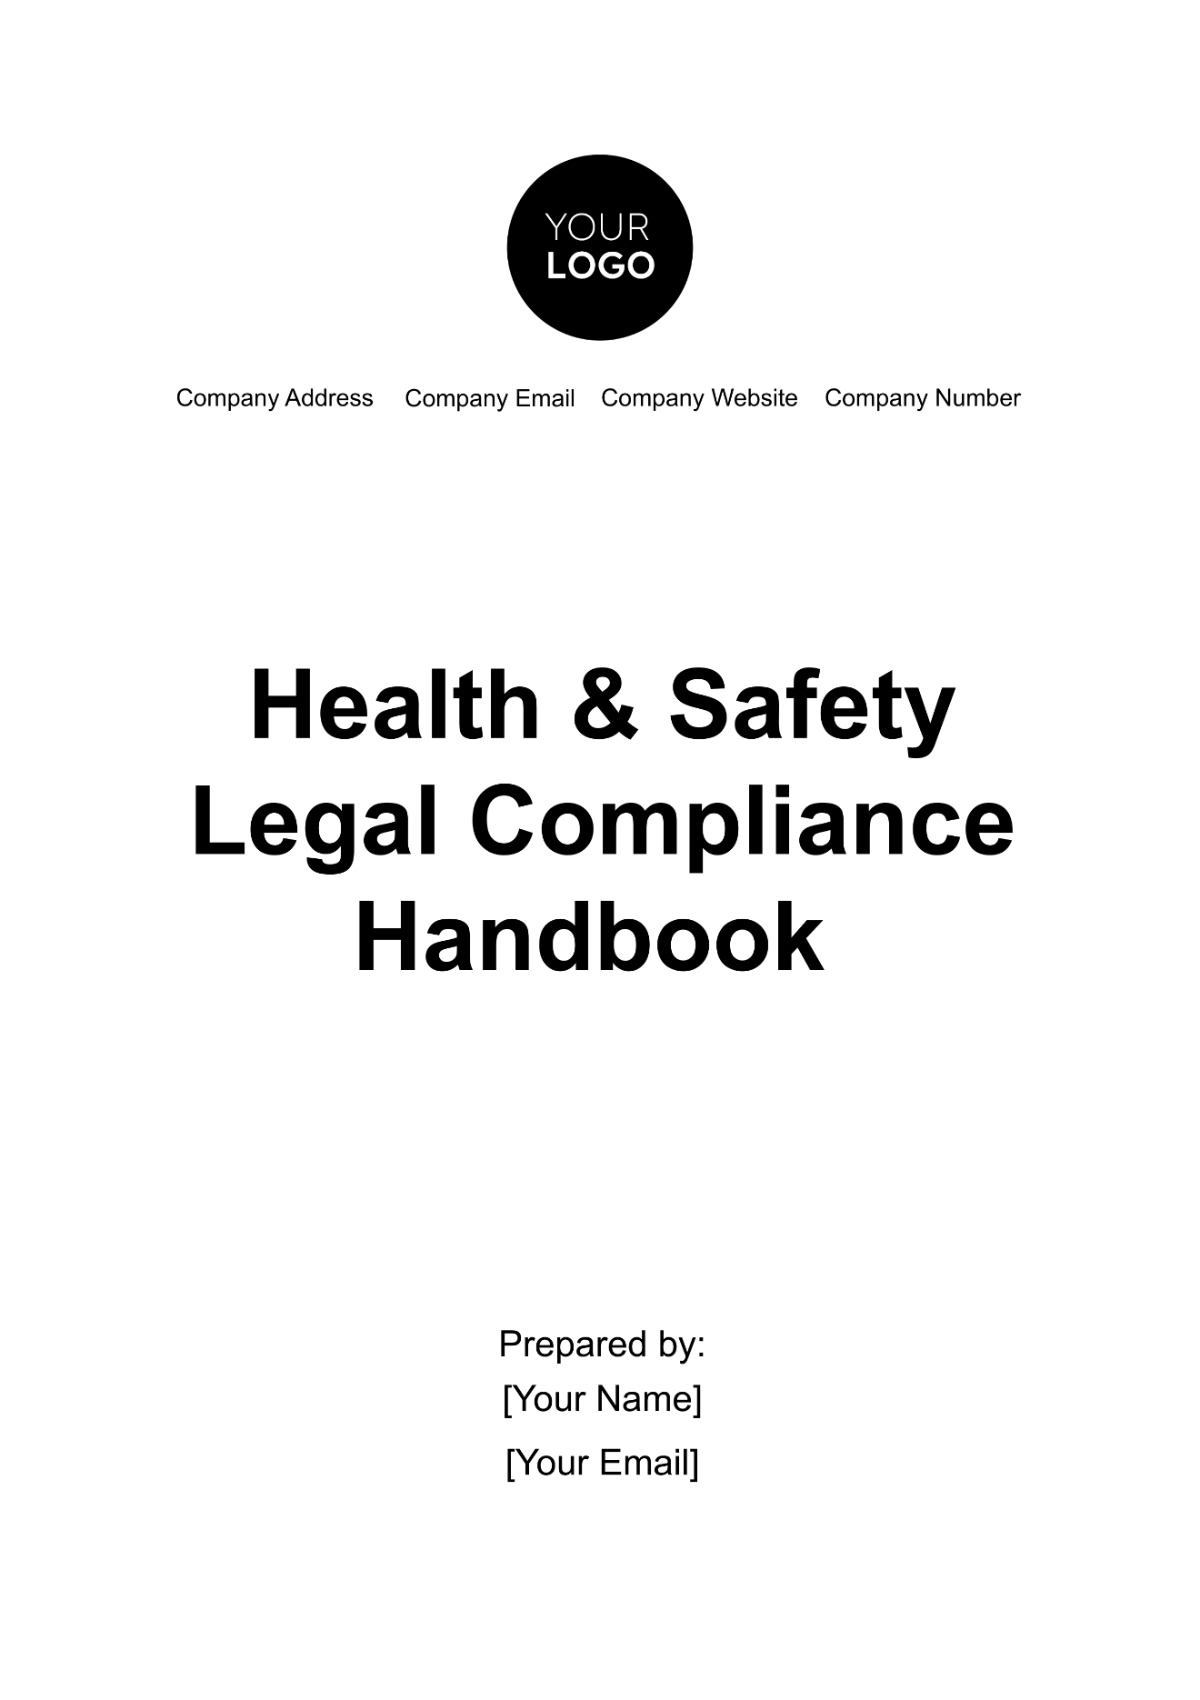 Free Health & Safety Legal Compliance Handbook Template